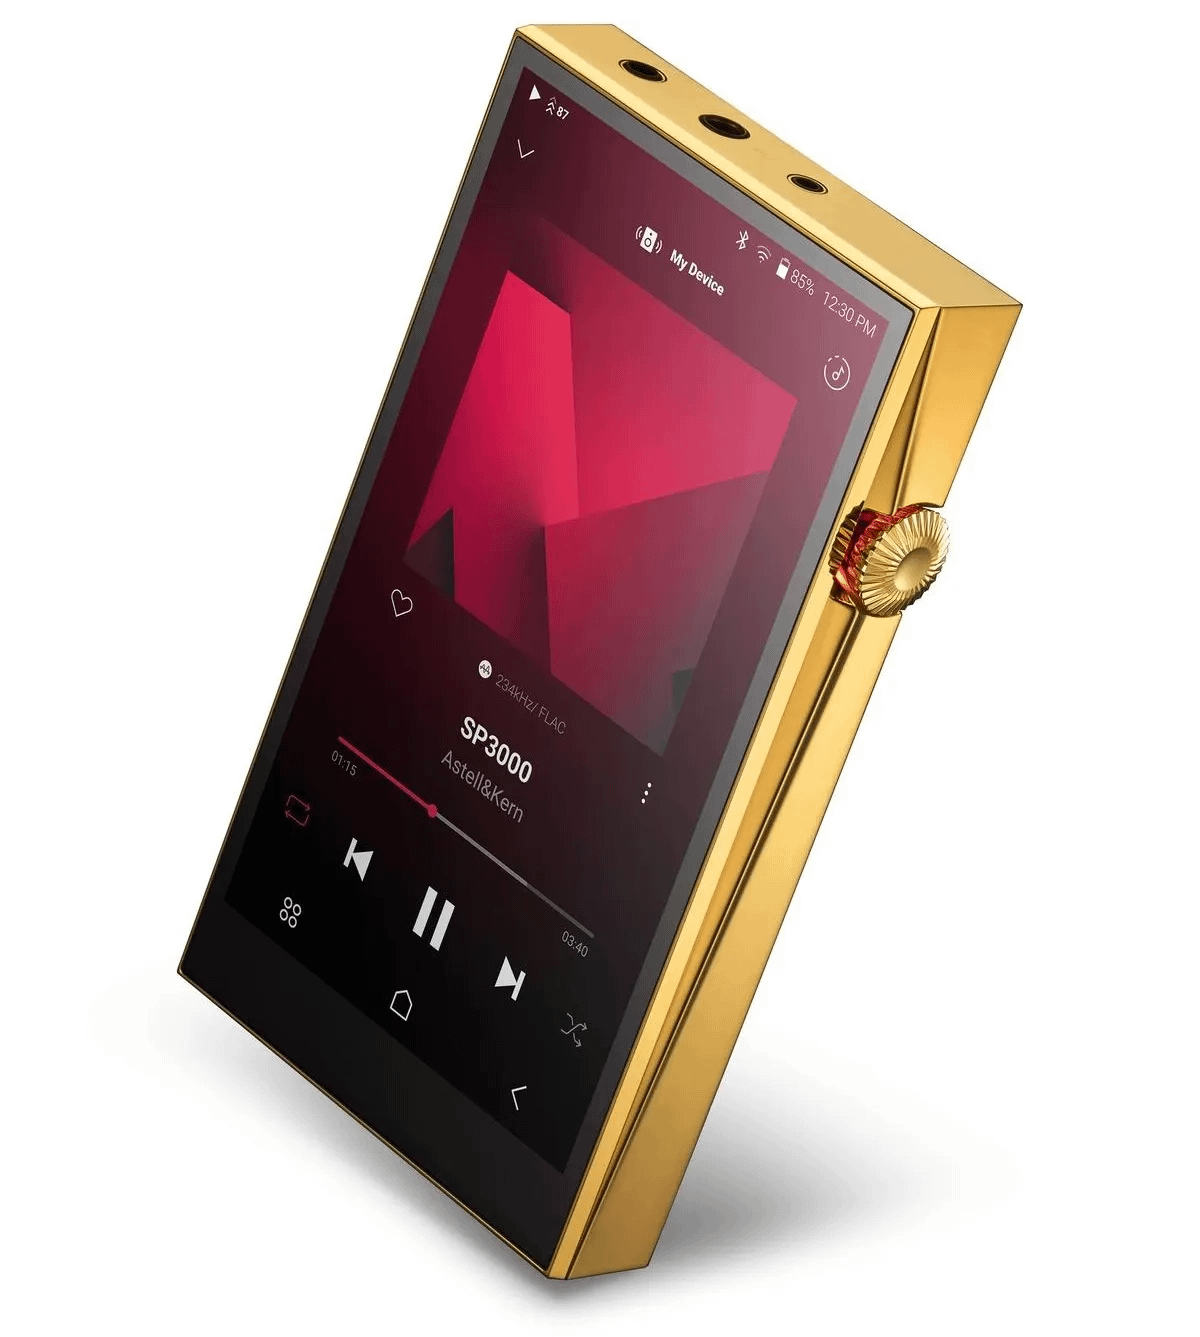 Setting a new standard for elegance in audio, Astell&Kern presents the A&ultima SP3000 Gold—a limited edition digital audio player encased in 24K gold. A&ultima SP3000 Gold 9844a6aa image1